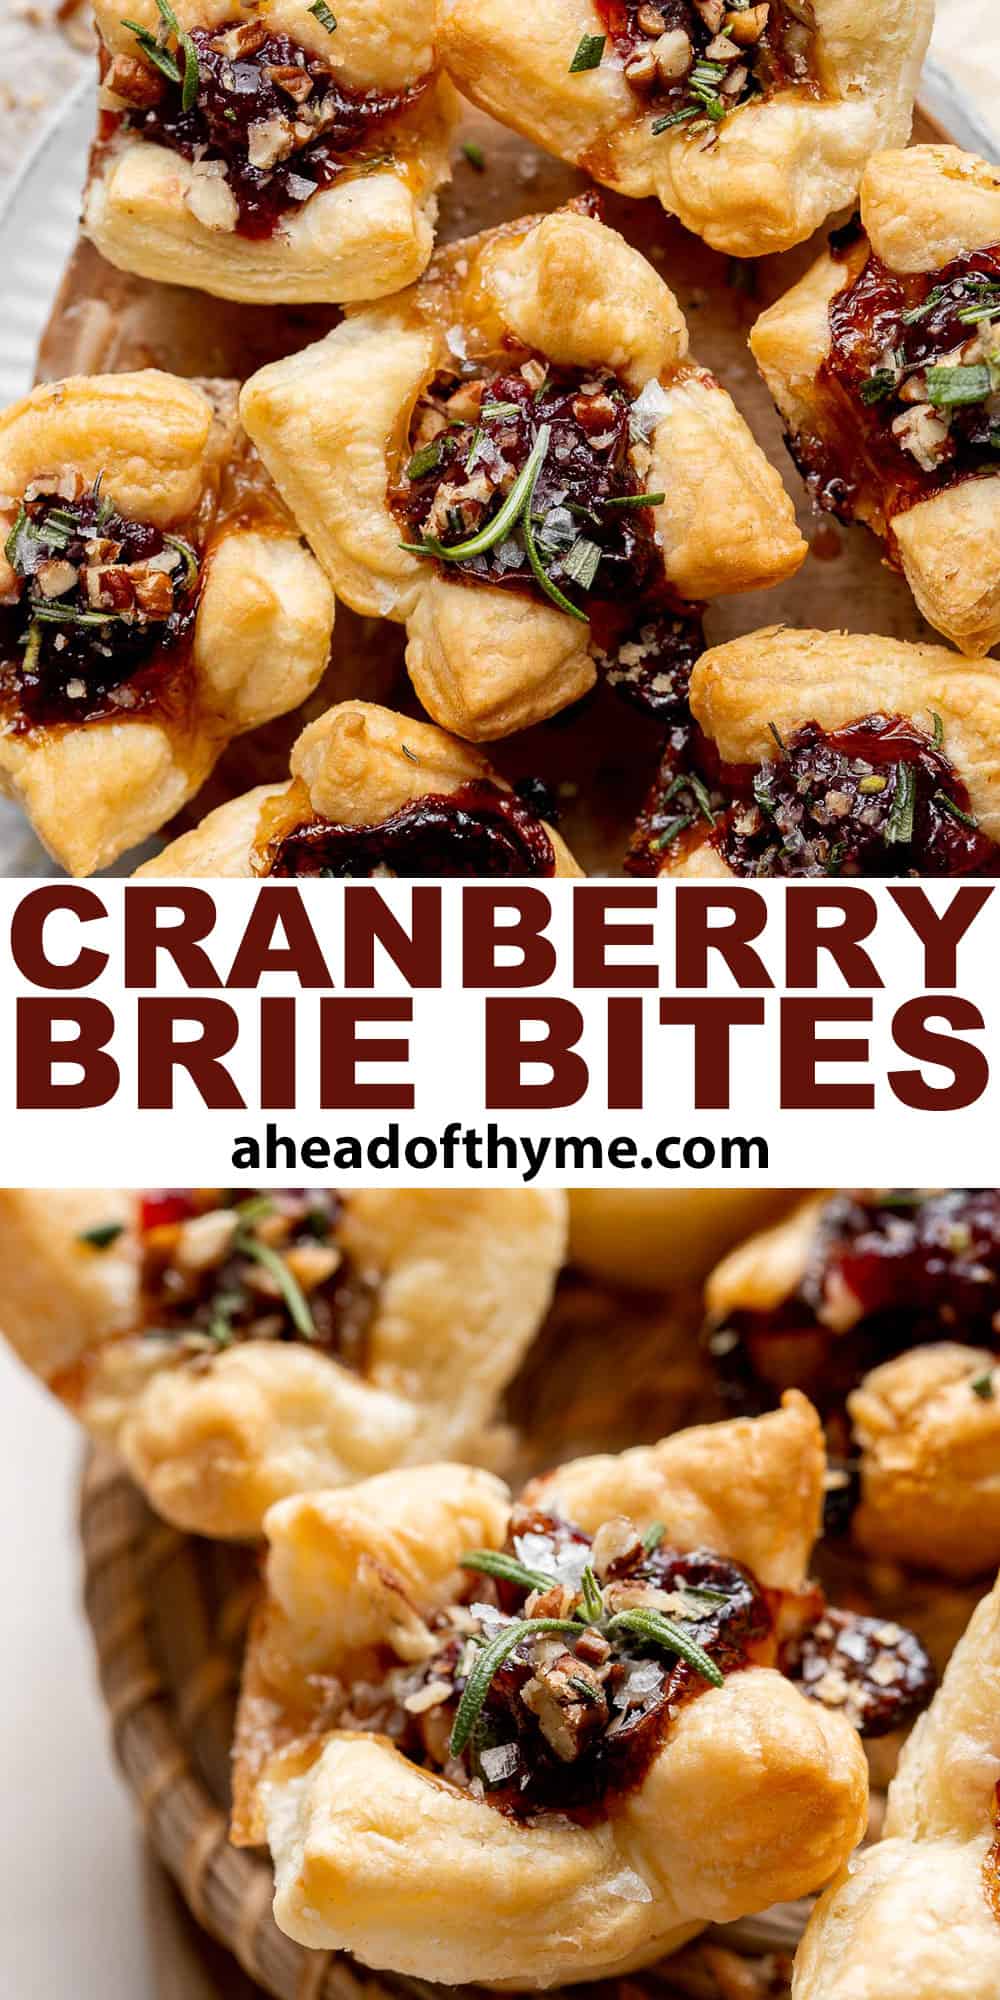 Cranberry Brie Bites are quick and easy to make with flaky puff pastry, gooey melty brie, and sweet cranberry sauce. The perfect holiday appetizer. | aheadofthyme.com